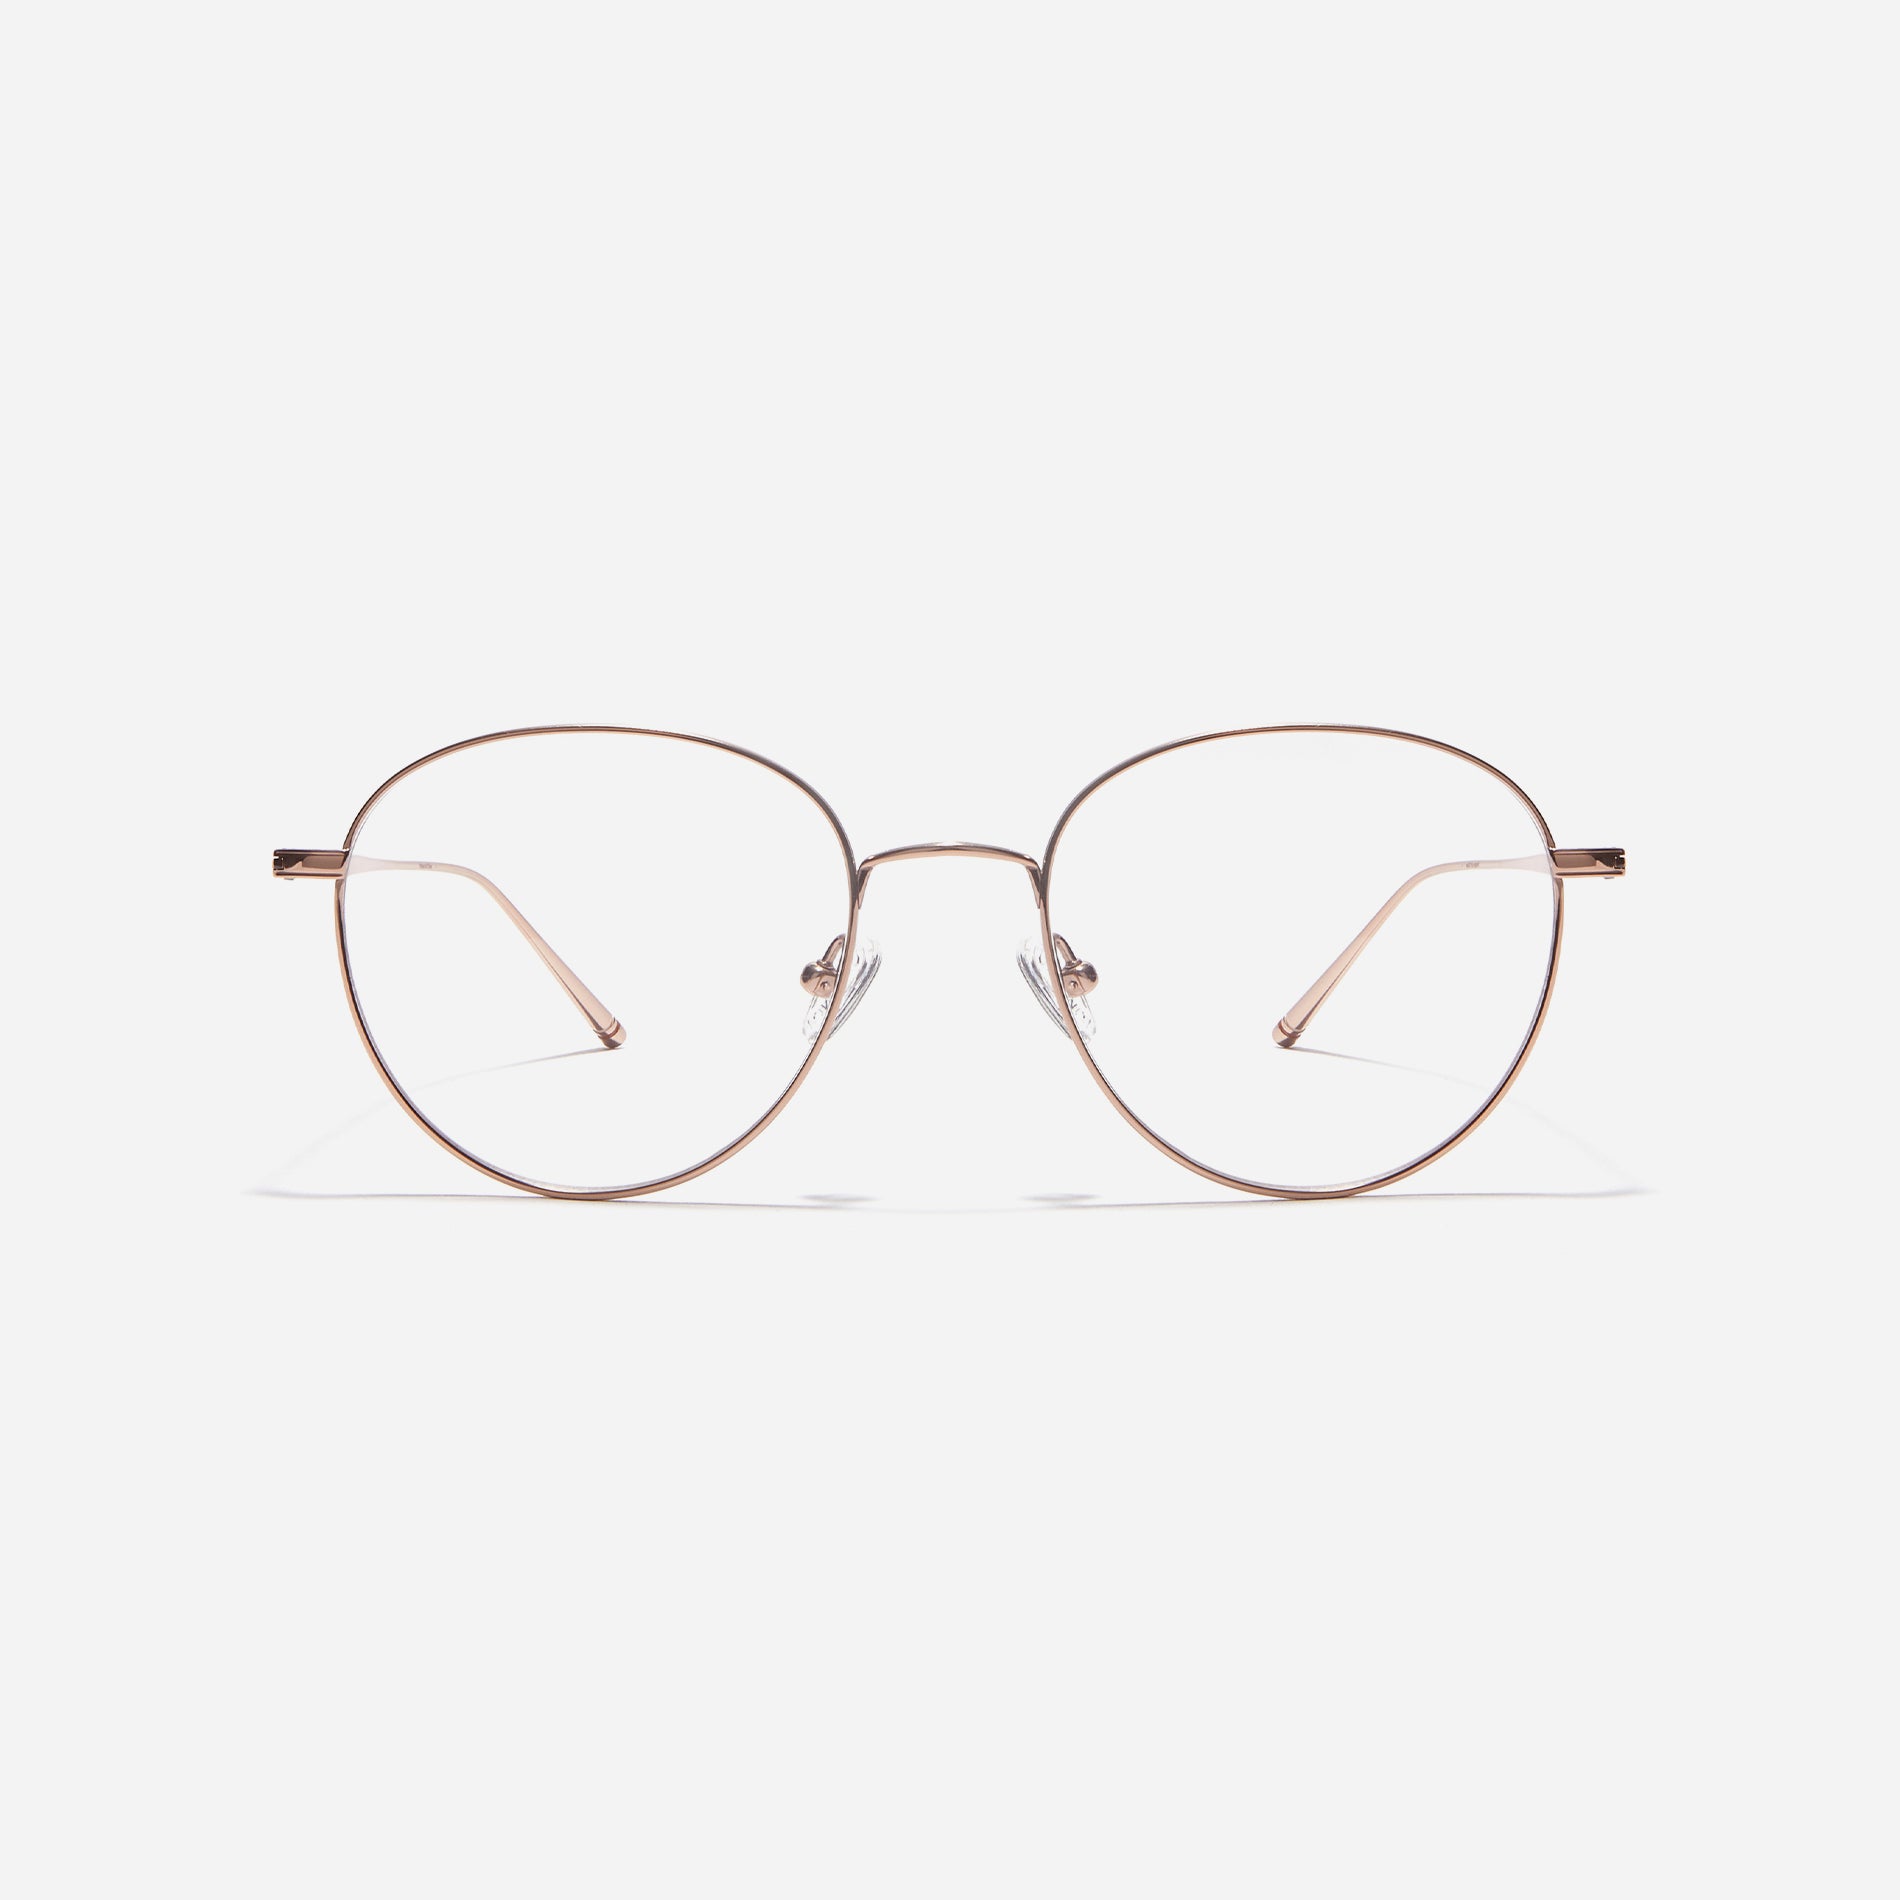 Boston-style round-shaped eyeglasses that naturally enhance one's facial features. Crafted entirely from titanium, they guarantee a lighter and more comfortable fit, while modern design makes them a perfect choice for those seeking a contemporary look.